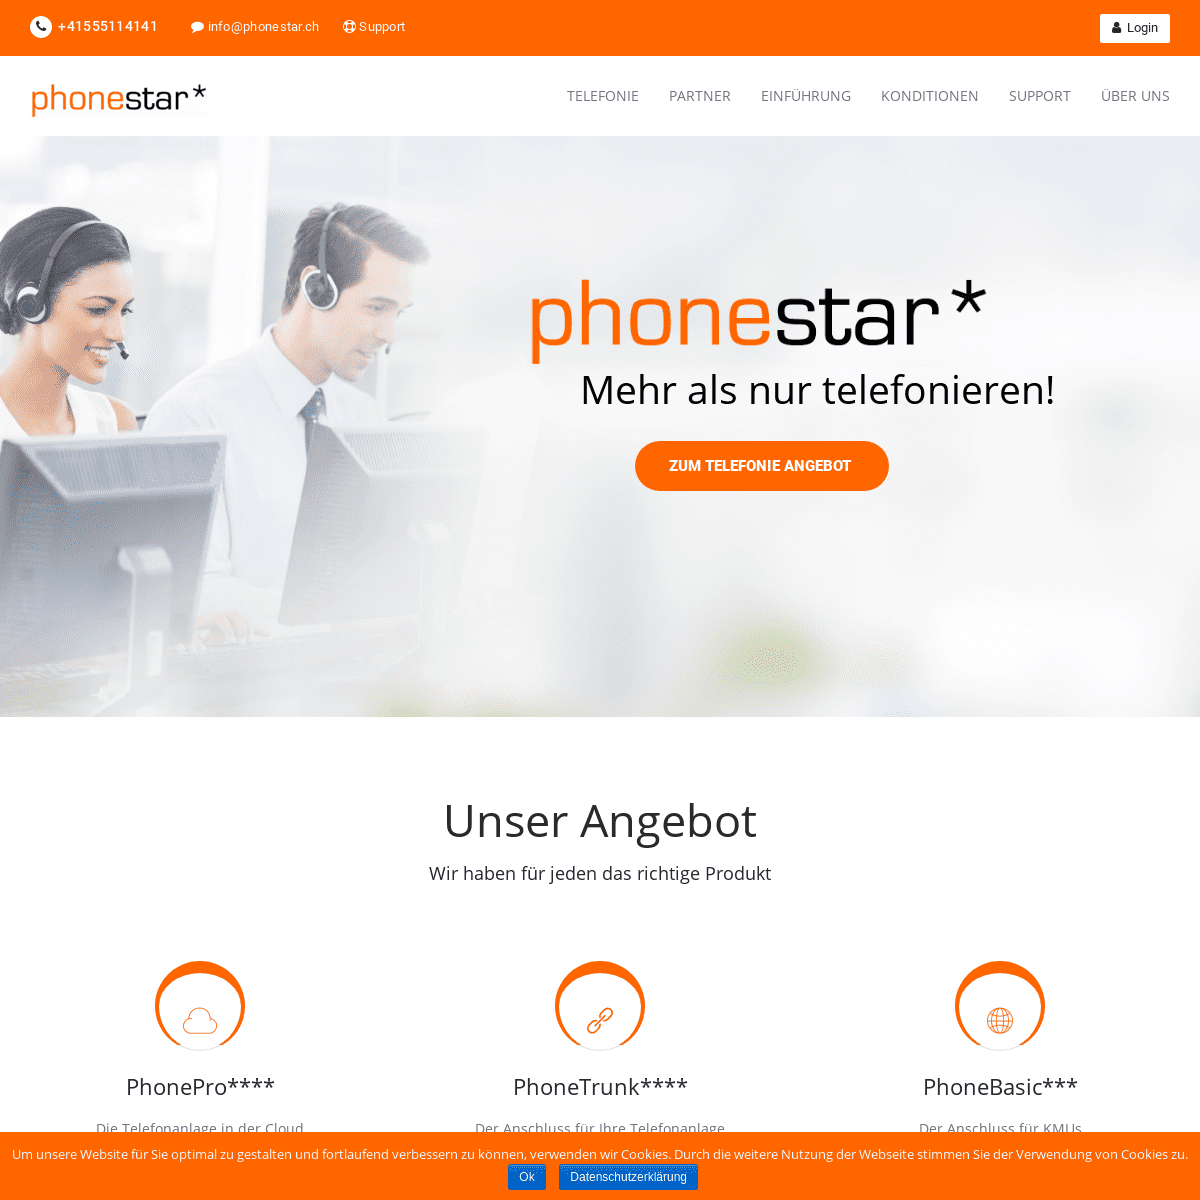 A complete backup of phonestar.ch